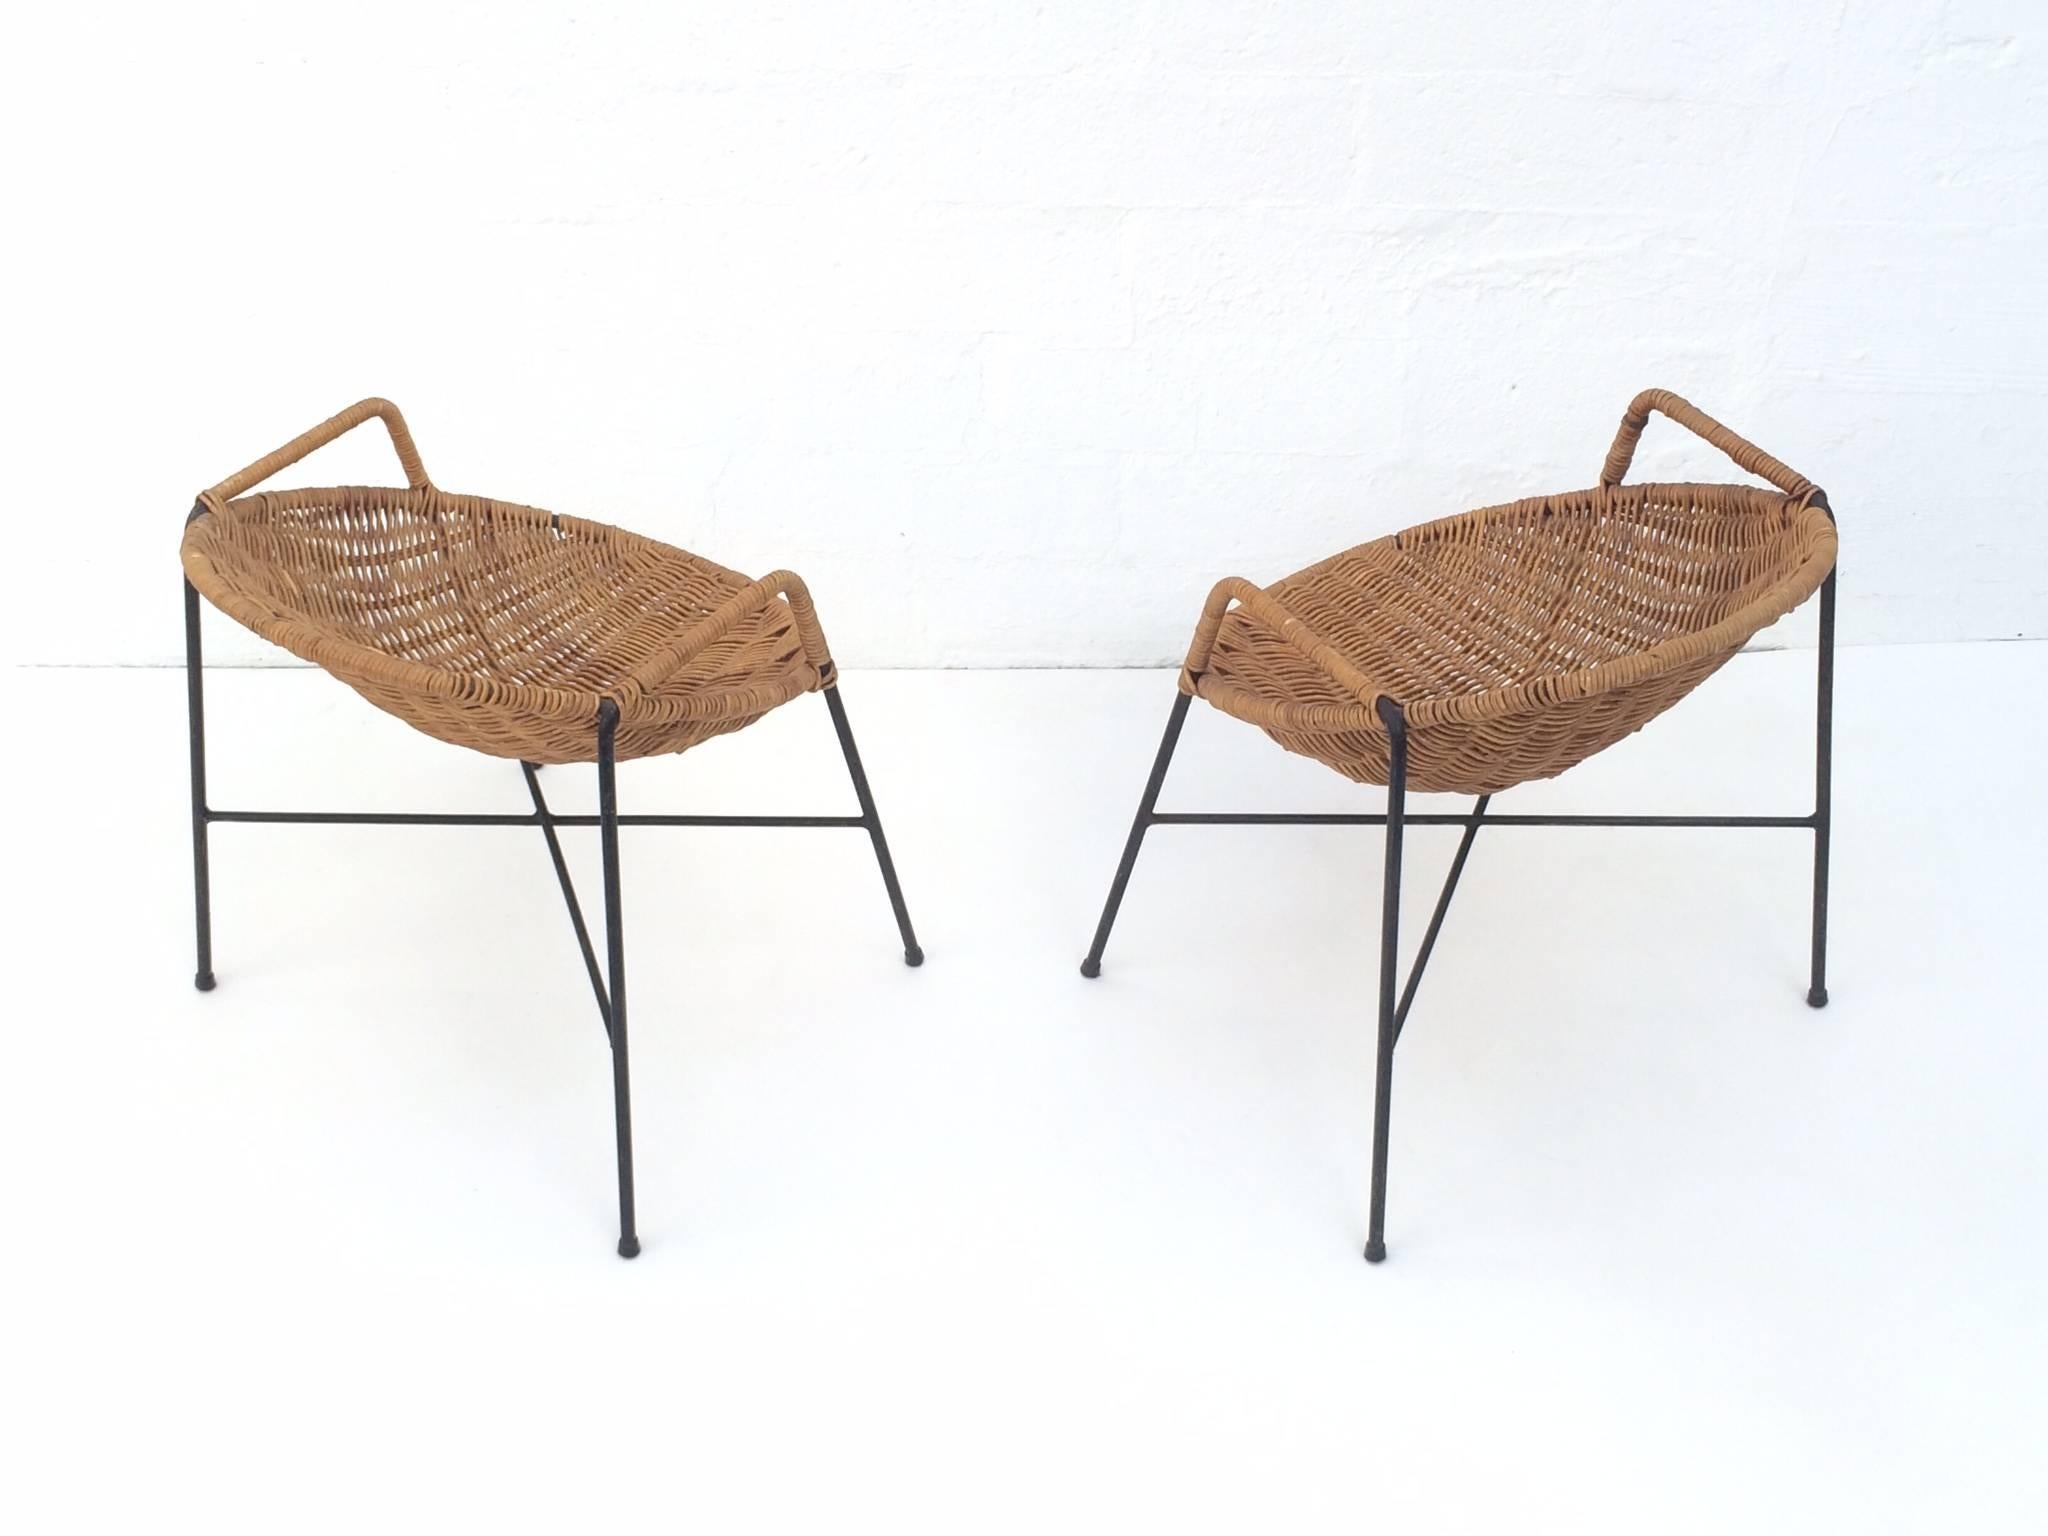 American Rare Pair of Wrought Iron and Wicker Child Chairs by Salterini 